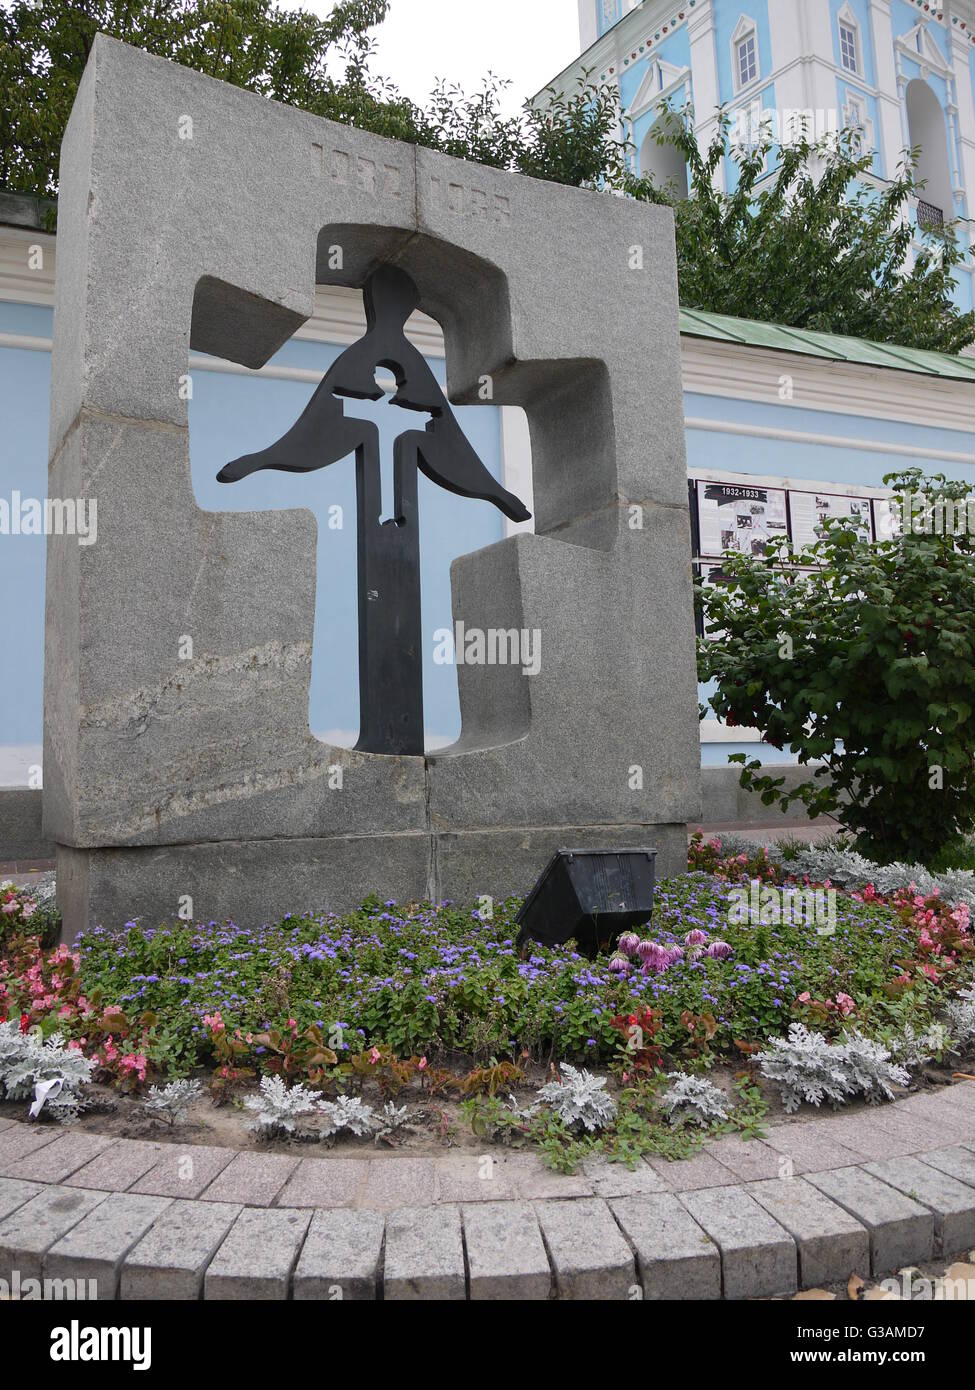 Monument for Holodomor, artificial famine caused by Staline in 1933 in Ukraine, on a square of the city center of Kiev Stock Photo